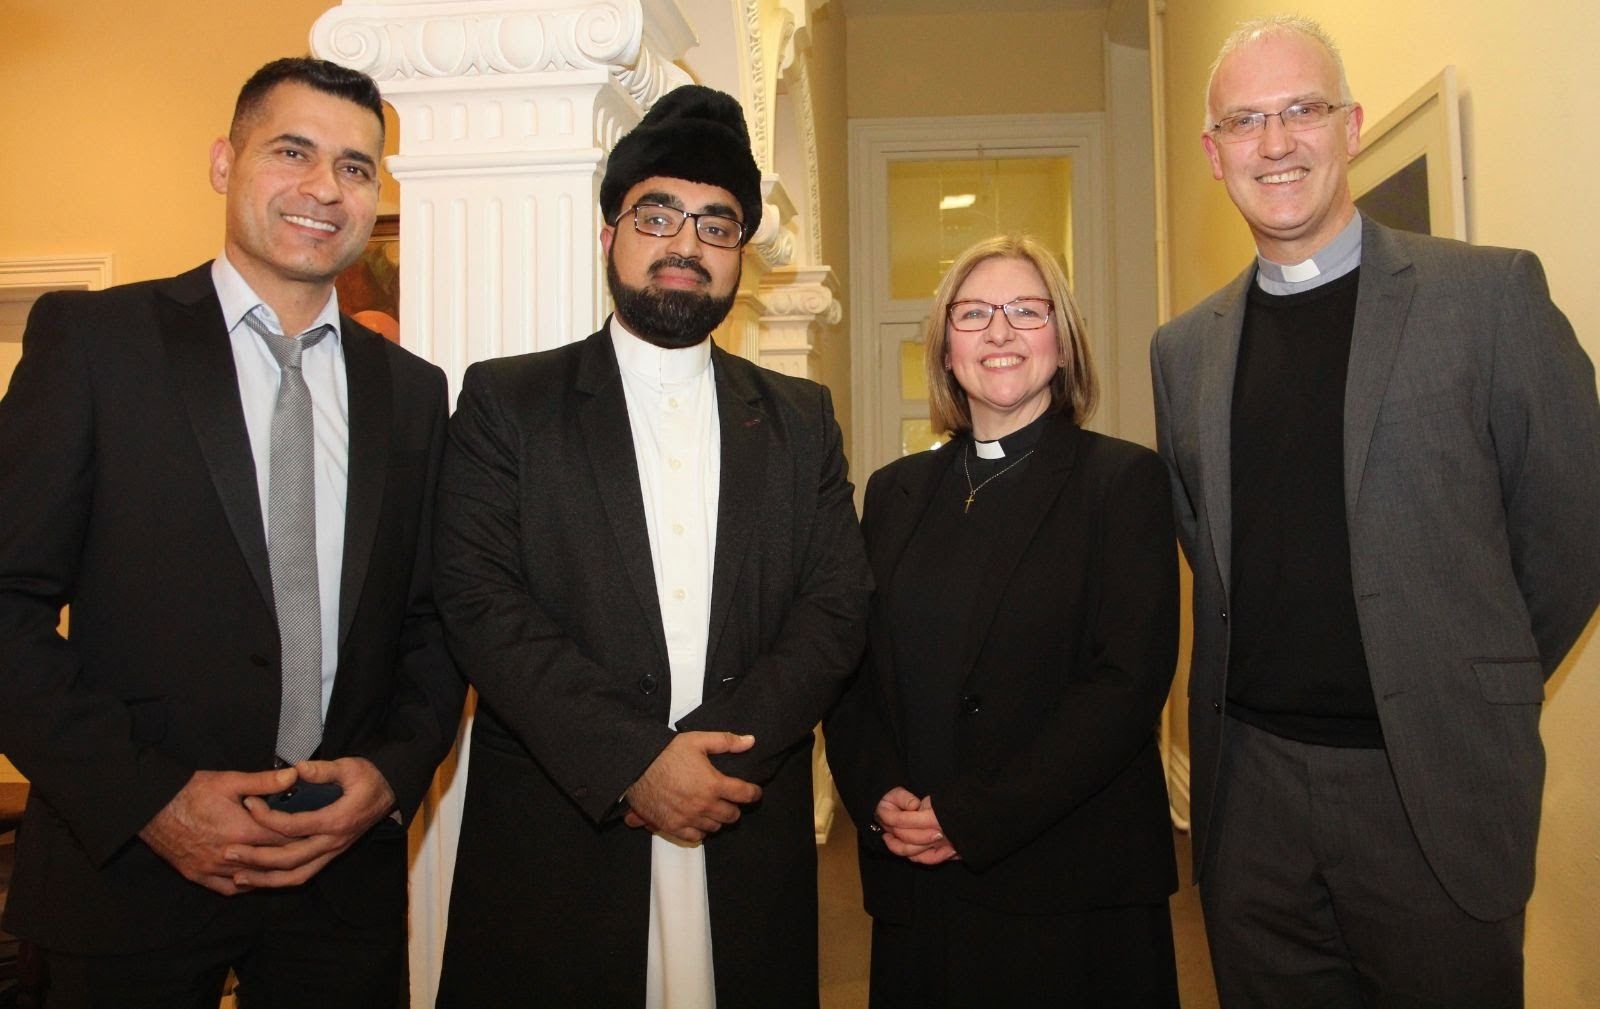 The Revd Suzanne Cousins pictured at the launch of her Braemor Study, Generous Love in Multi-Faith Ireland, in March 2018 with (from left) Mr Shafqat Ayub, Shaykh Dr Umar Al-Qadri, (Head Imam of the Al-Mustafa Islamic Education and Cultural Centre, Ireland), and the Revd Canon Dr Maurice Elliott (Director, Church of Ireland Theological Institute).  Credit: Lynn Glanville.